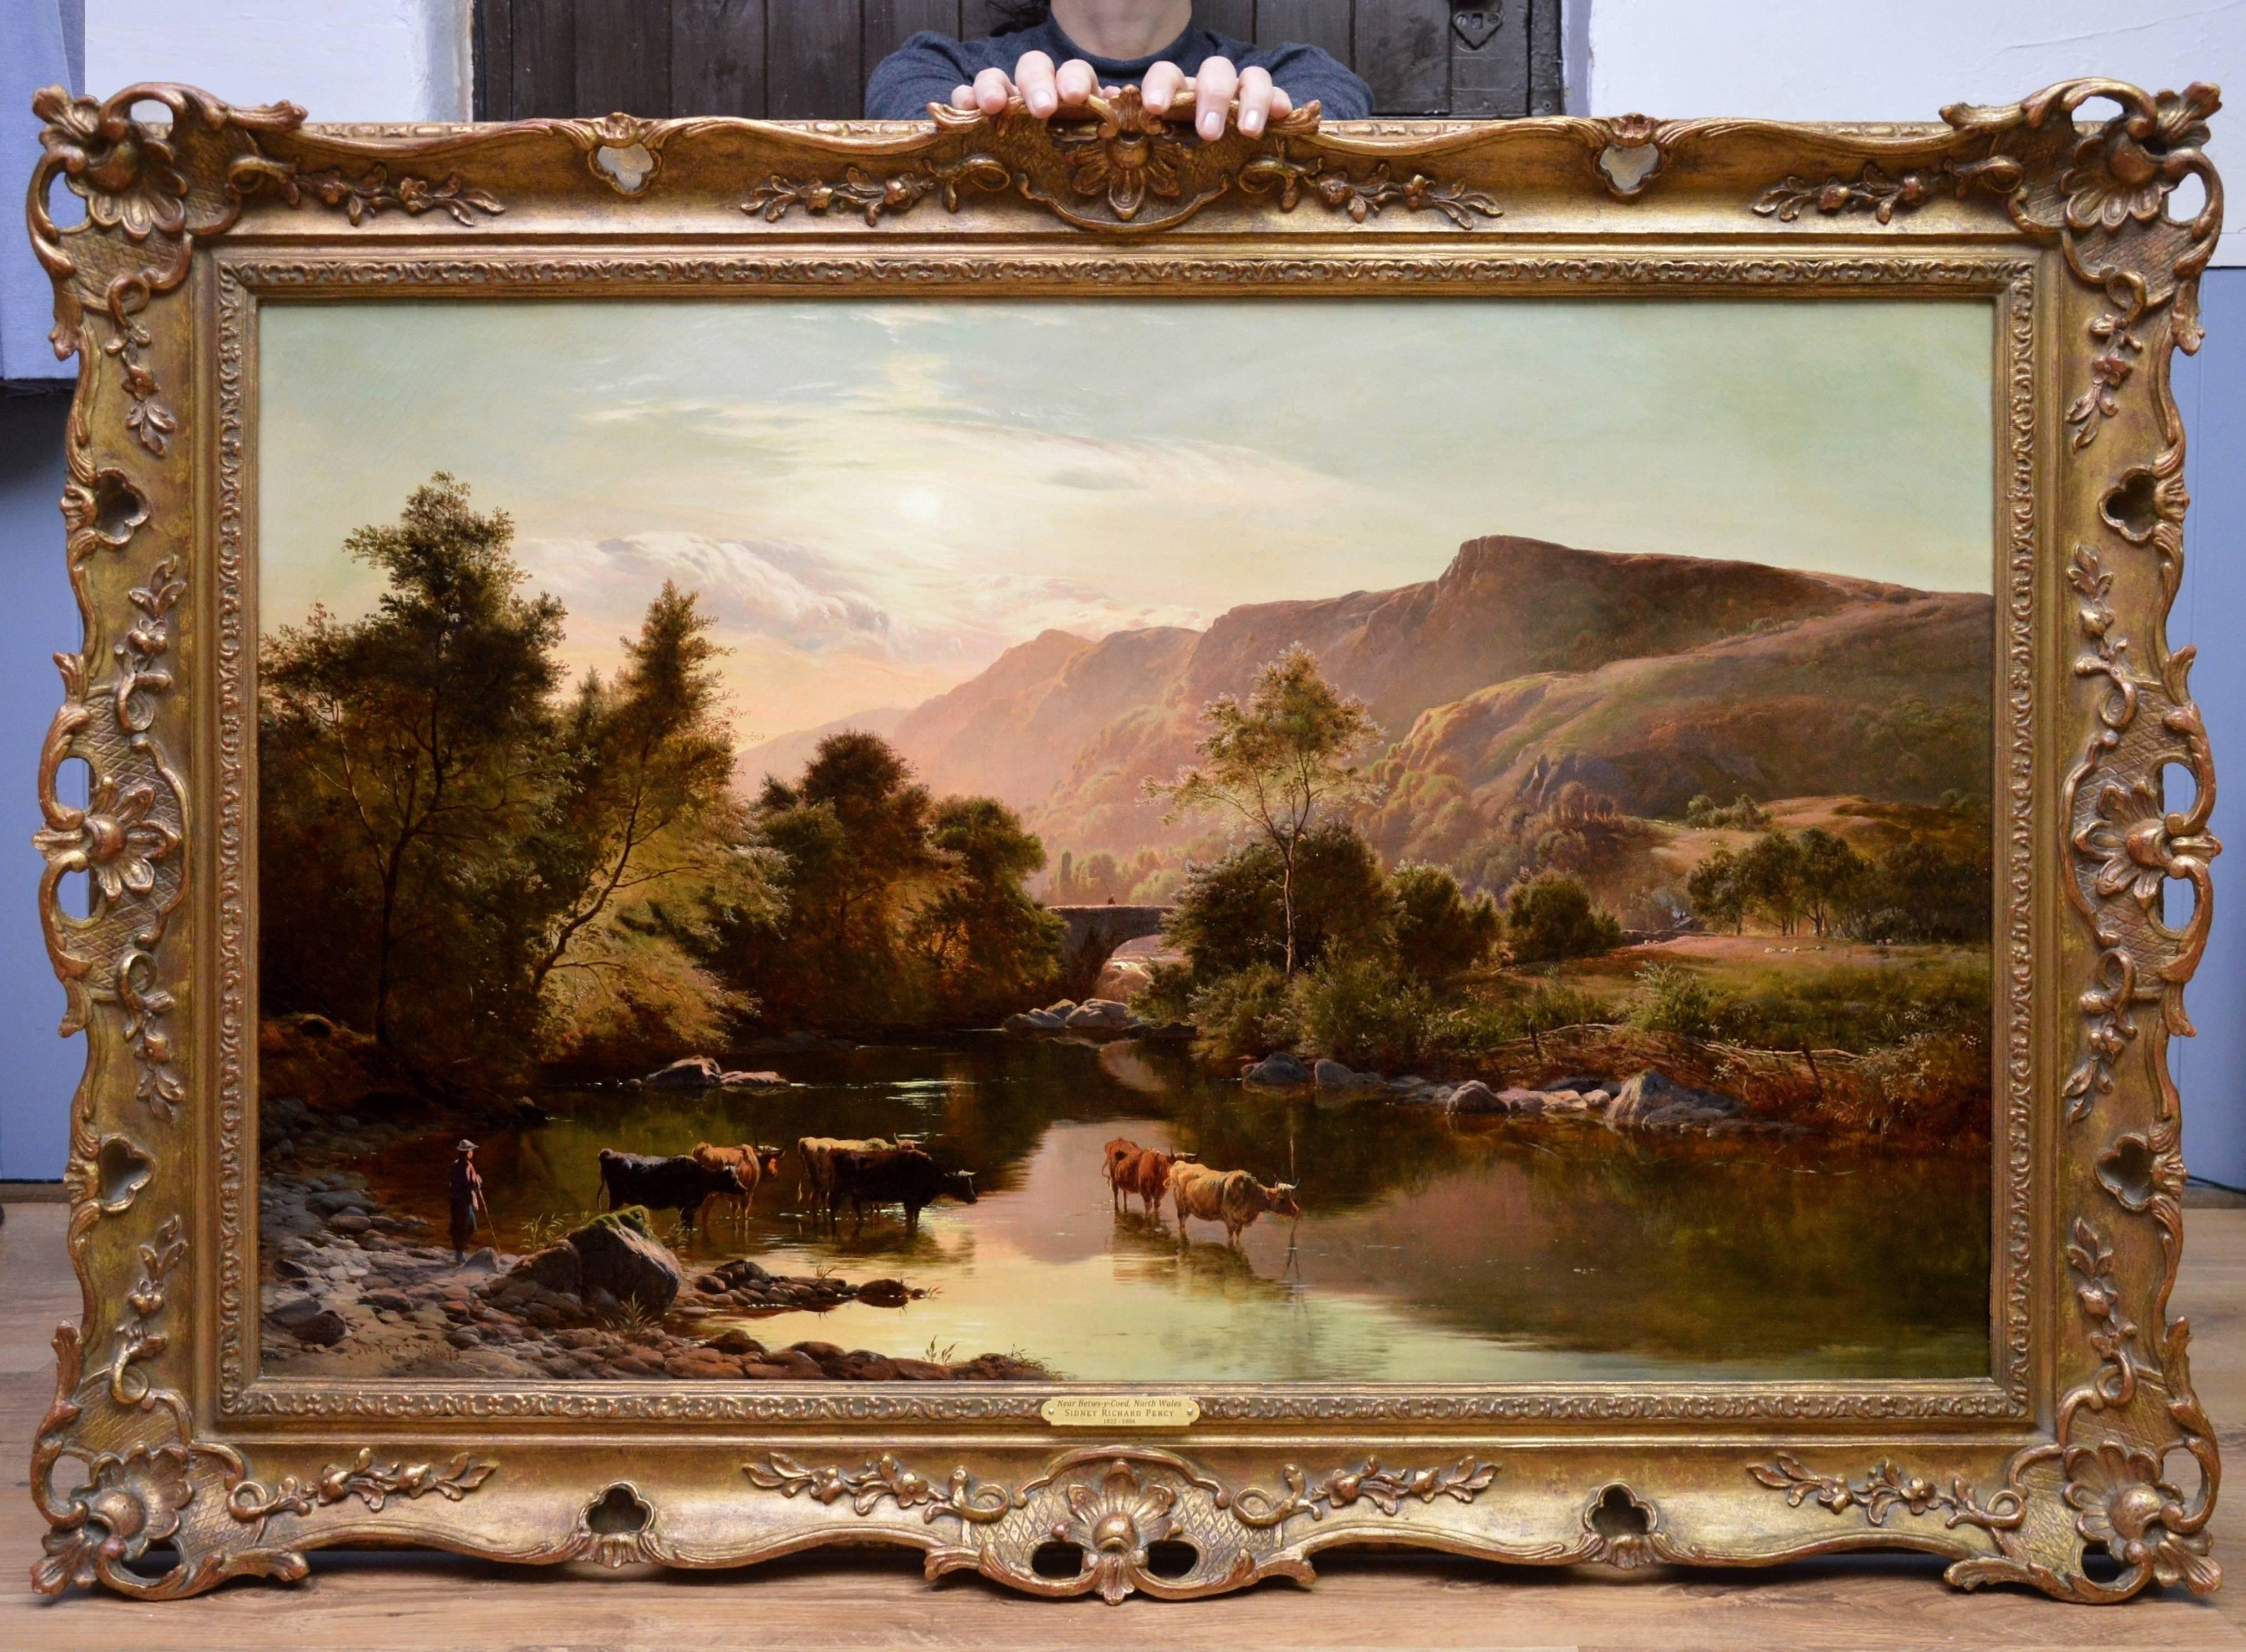 Betws-y-Coed, North Wales - 19th Century Oil Painting - Sidney Richard Percy 1